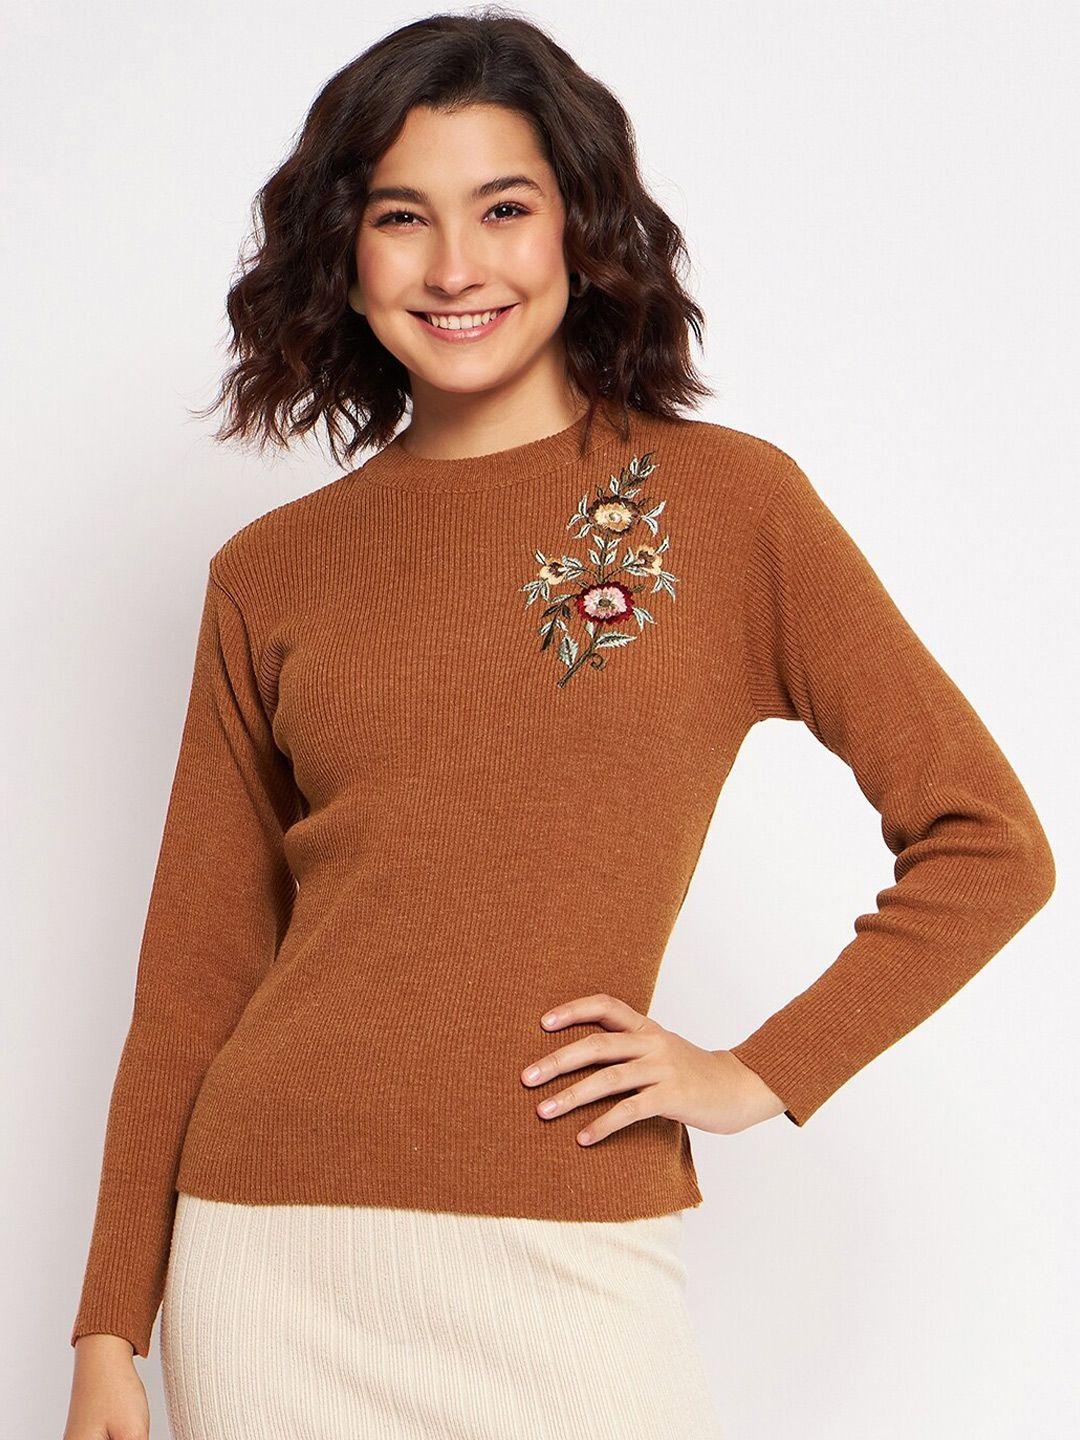 clapton-ribbed-floral-embroidered-pullover-sweater